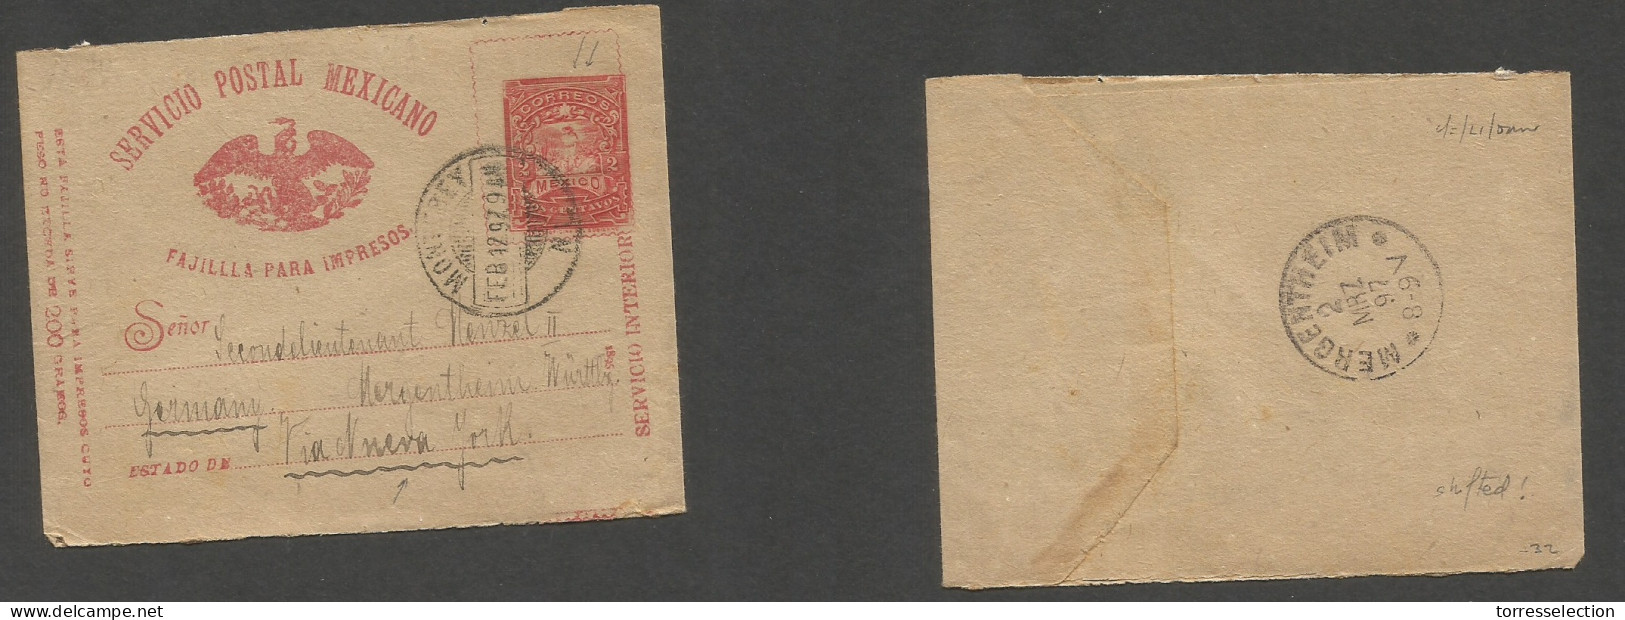 MEXICO - Stationery. 1897 (12 Febr) Monterrey - Germany, Mergentheim (2 March) Via NY. Shifted 2c Red Military Issue Com - Mexico